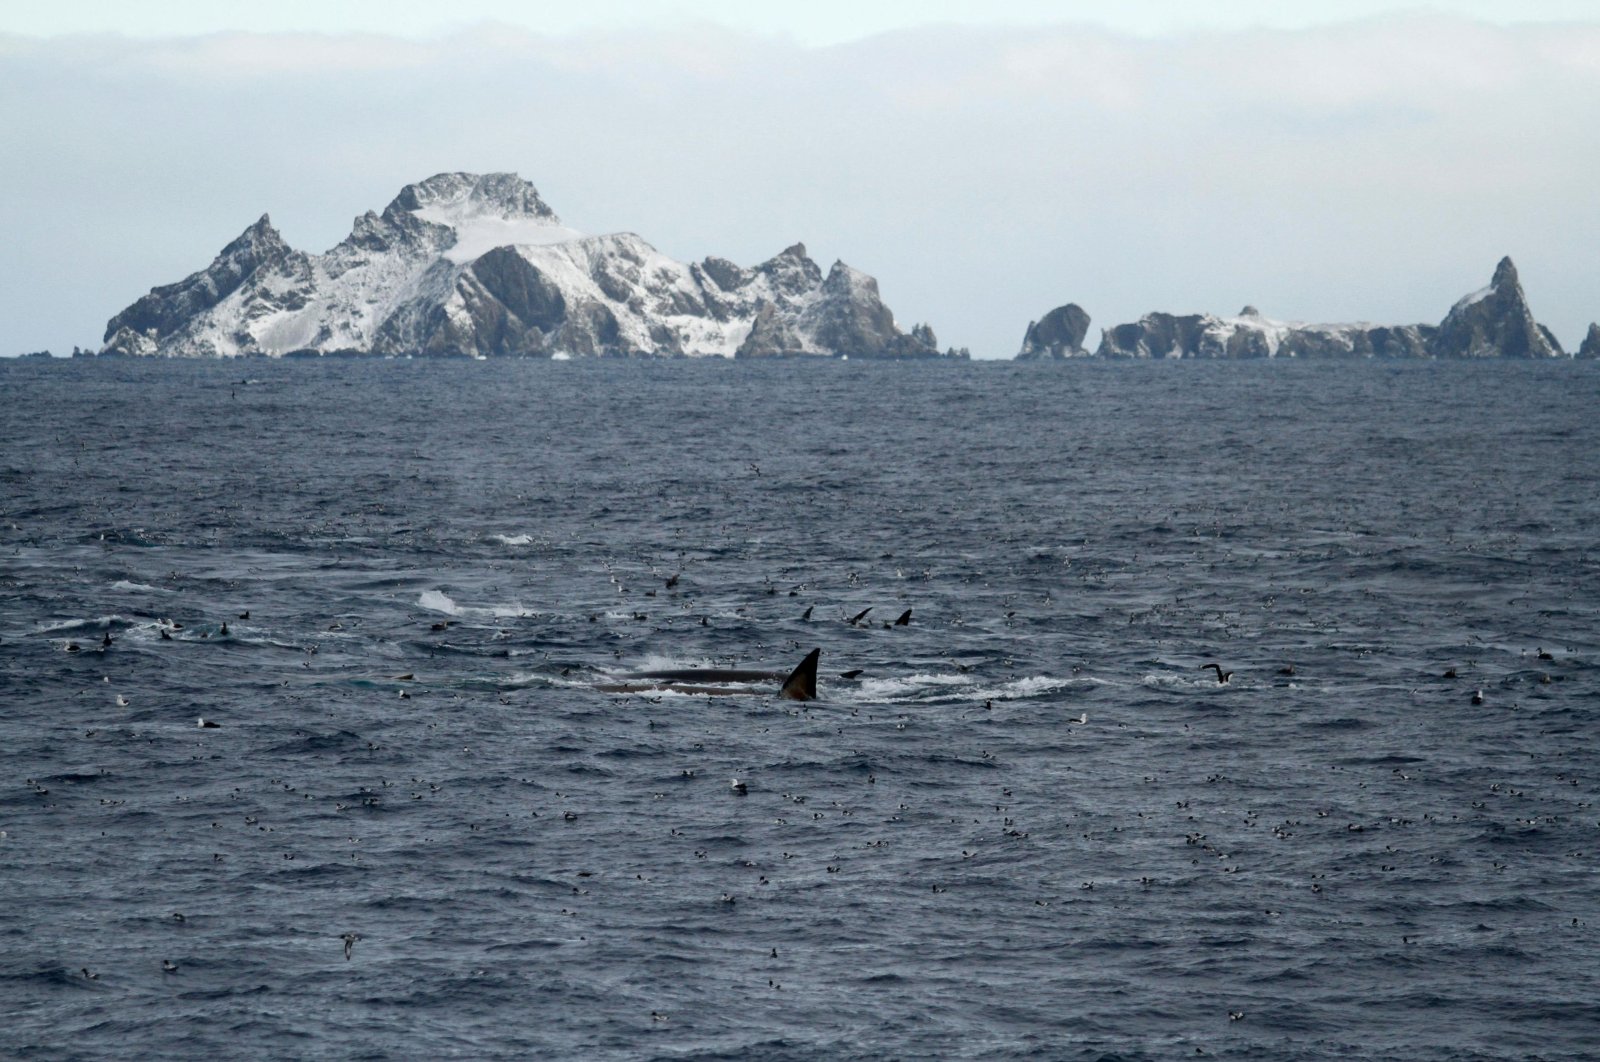 Fin whales feeding on the northern coast of Elephant Island, Antarctica, April 25, 2018. (Handout by Sacha Viquerat via AFP)